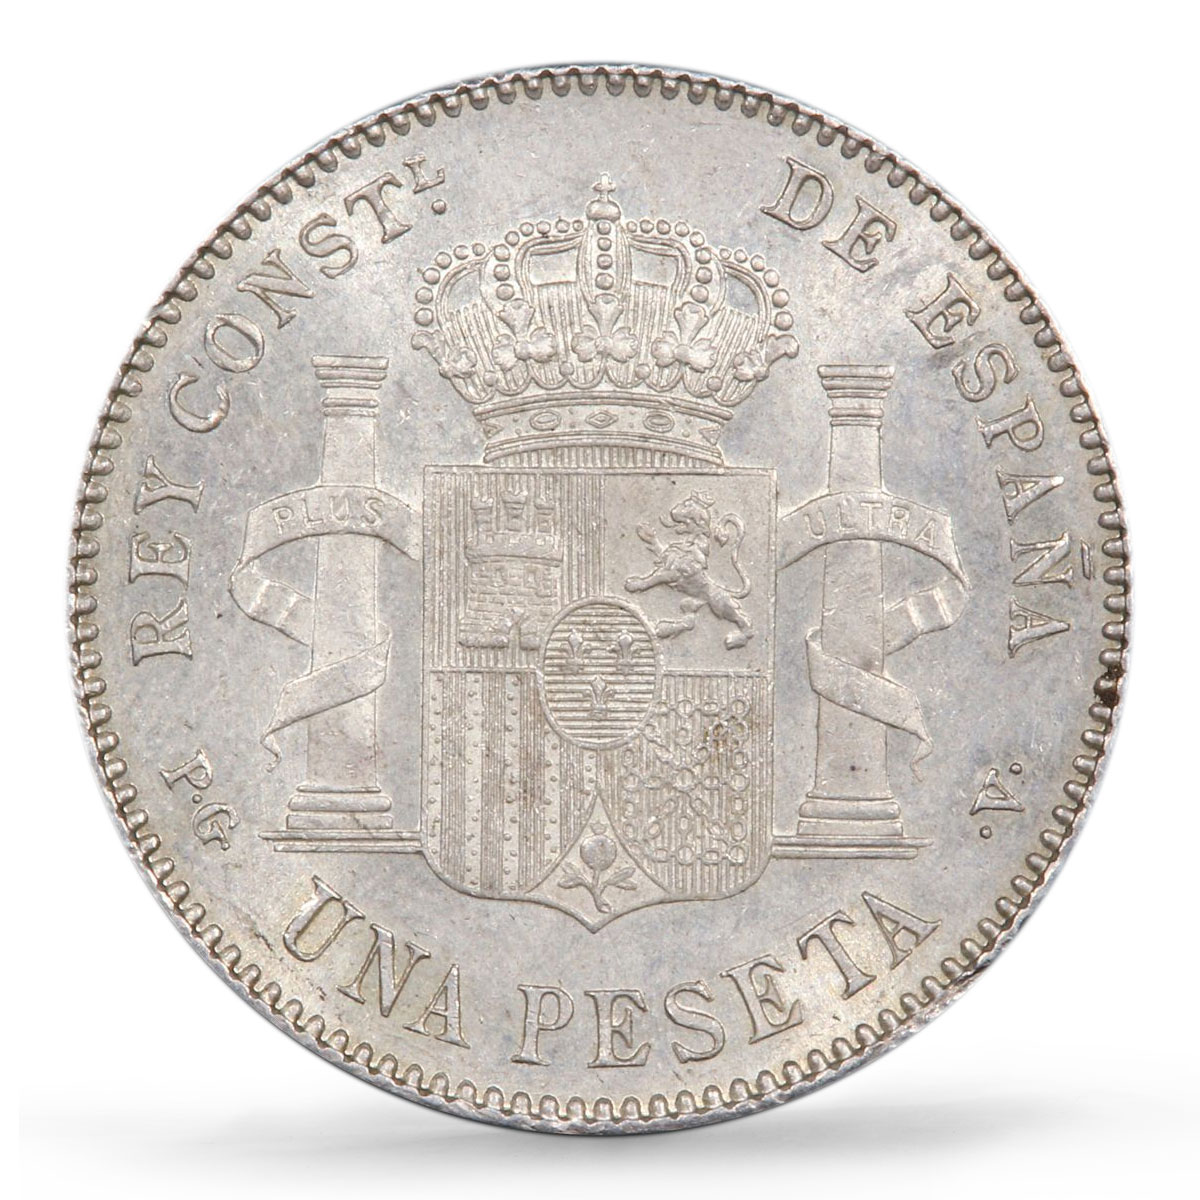 Spain 1 peseta Regular Coinage Child Alfonso KM-706 MS64 PCGS silver coin 1896